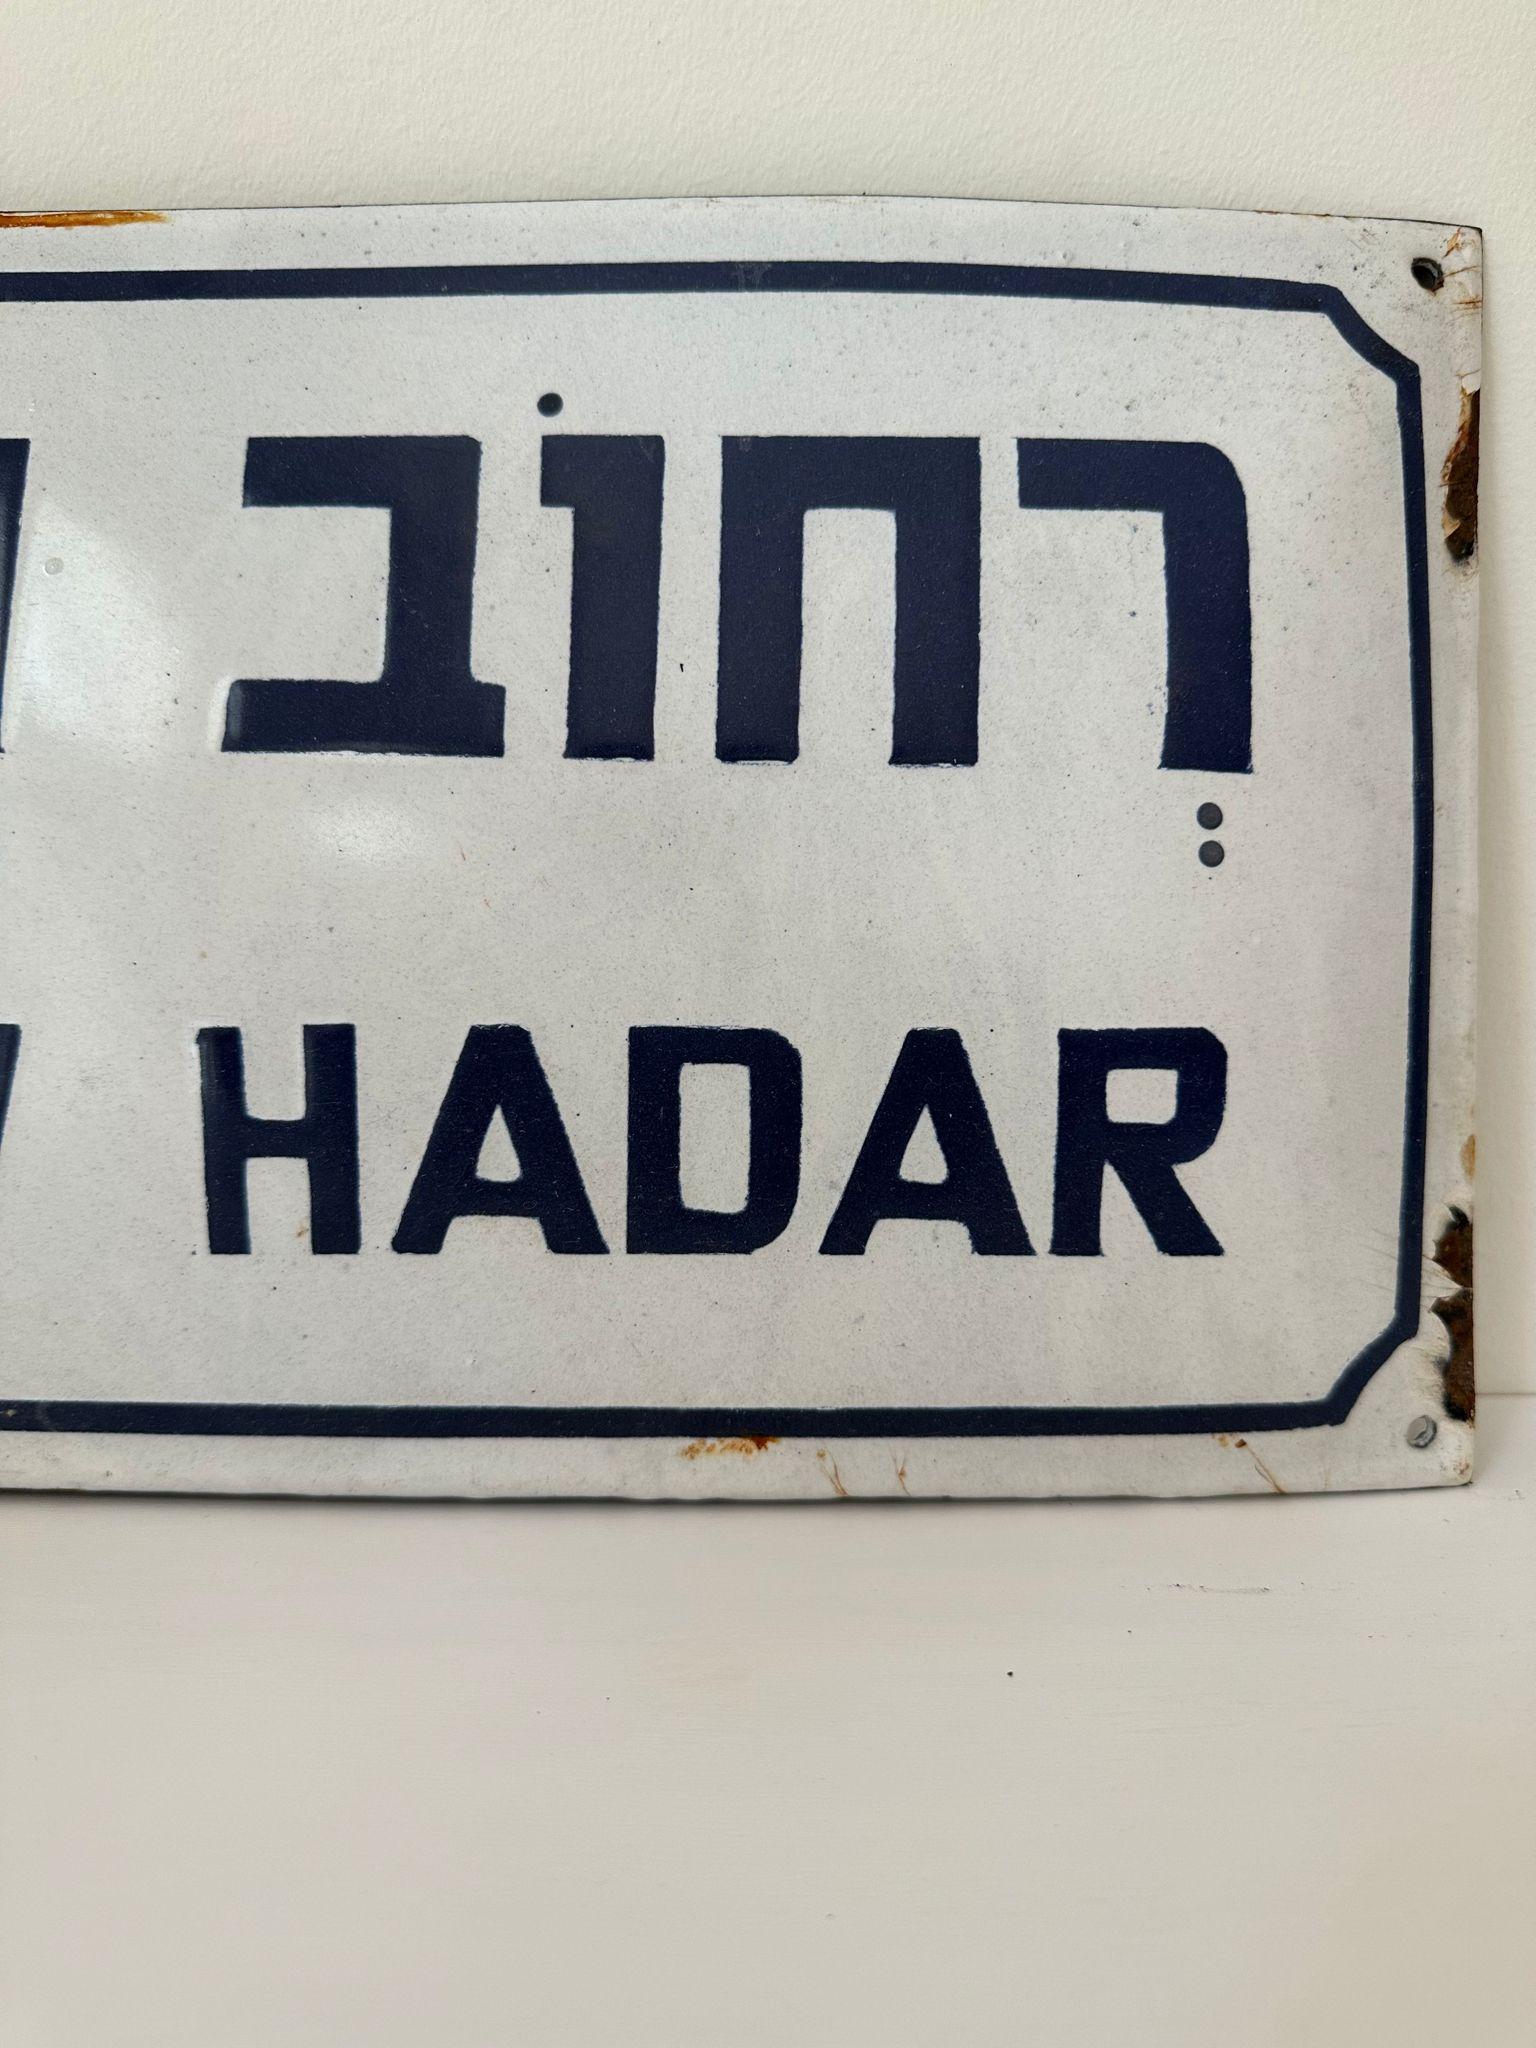 Mid-20th century handmade Israeli street name sign. Made of enamel and iron, this street sign was created shortly after the establishment of the state of Israel in 1948. The sign is written in bolt blue letters over a white background, alluding to